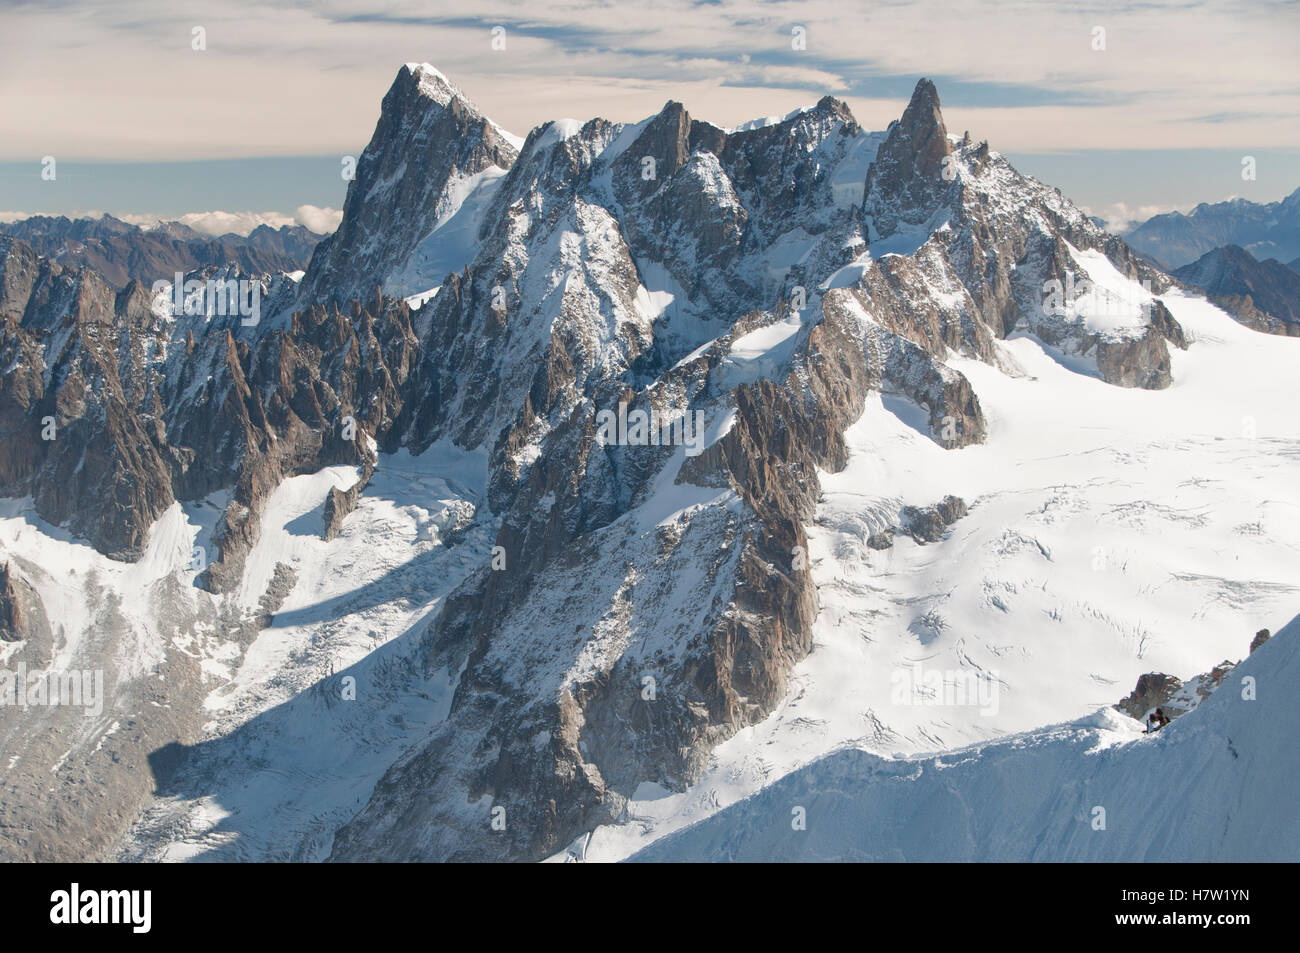 Grandes Jorasses of the Mont Blanc massif, as viewed from the Aiguille du Midi, Chamonix-Mont-Blanc, France Stock Photo